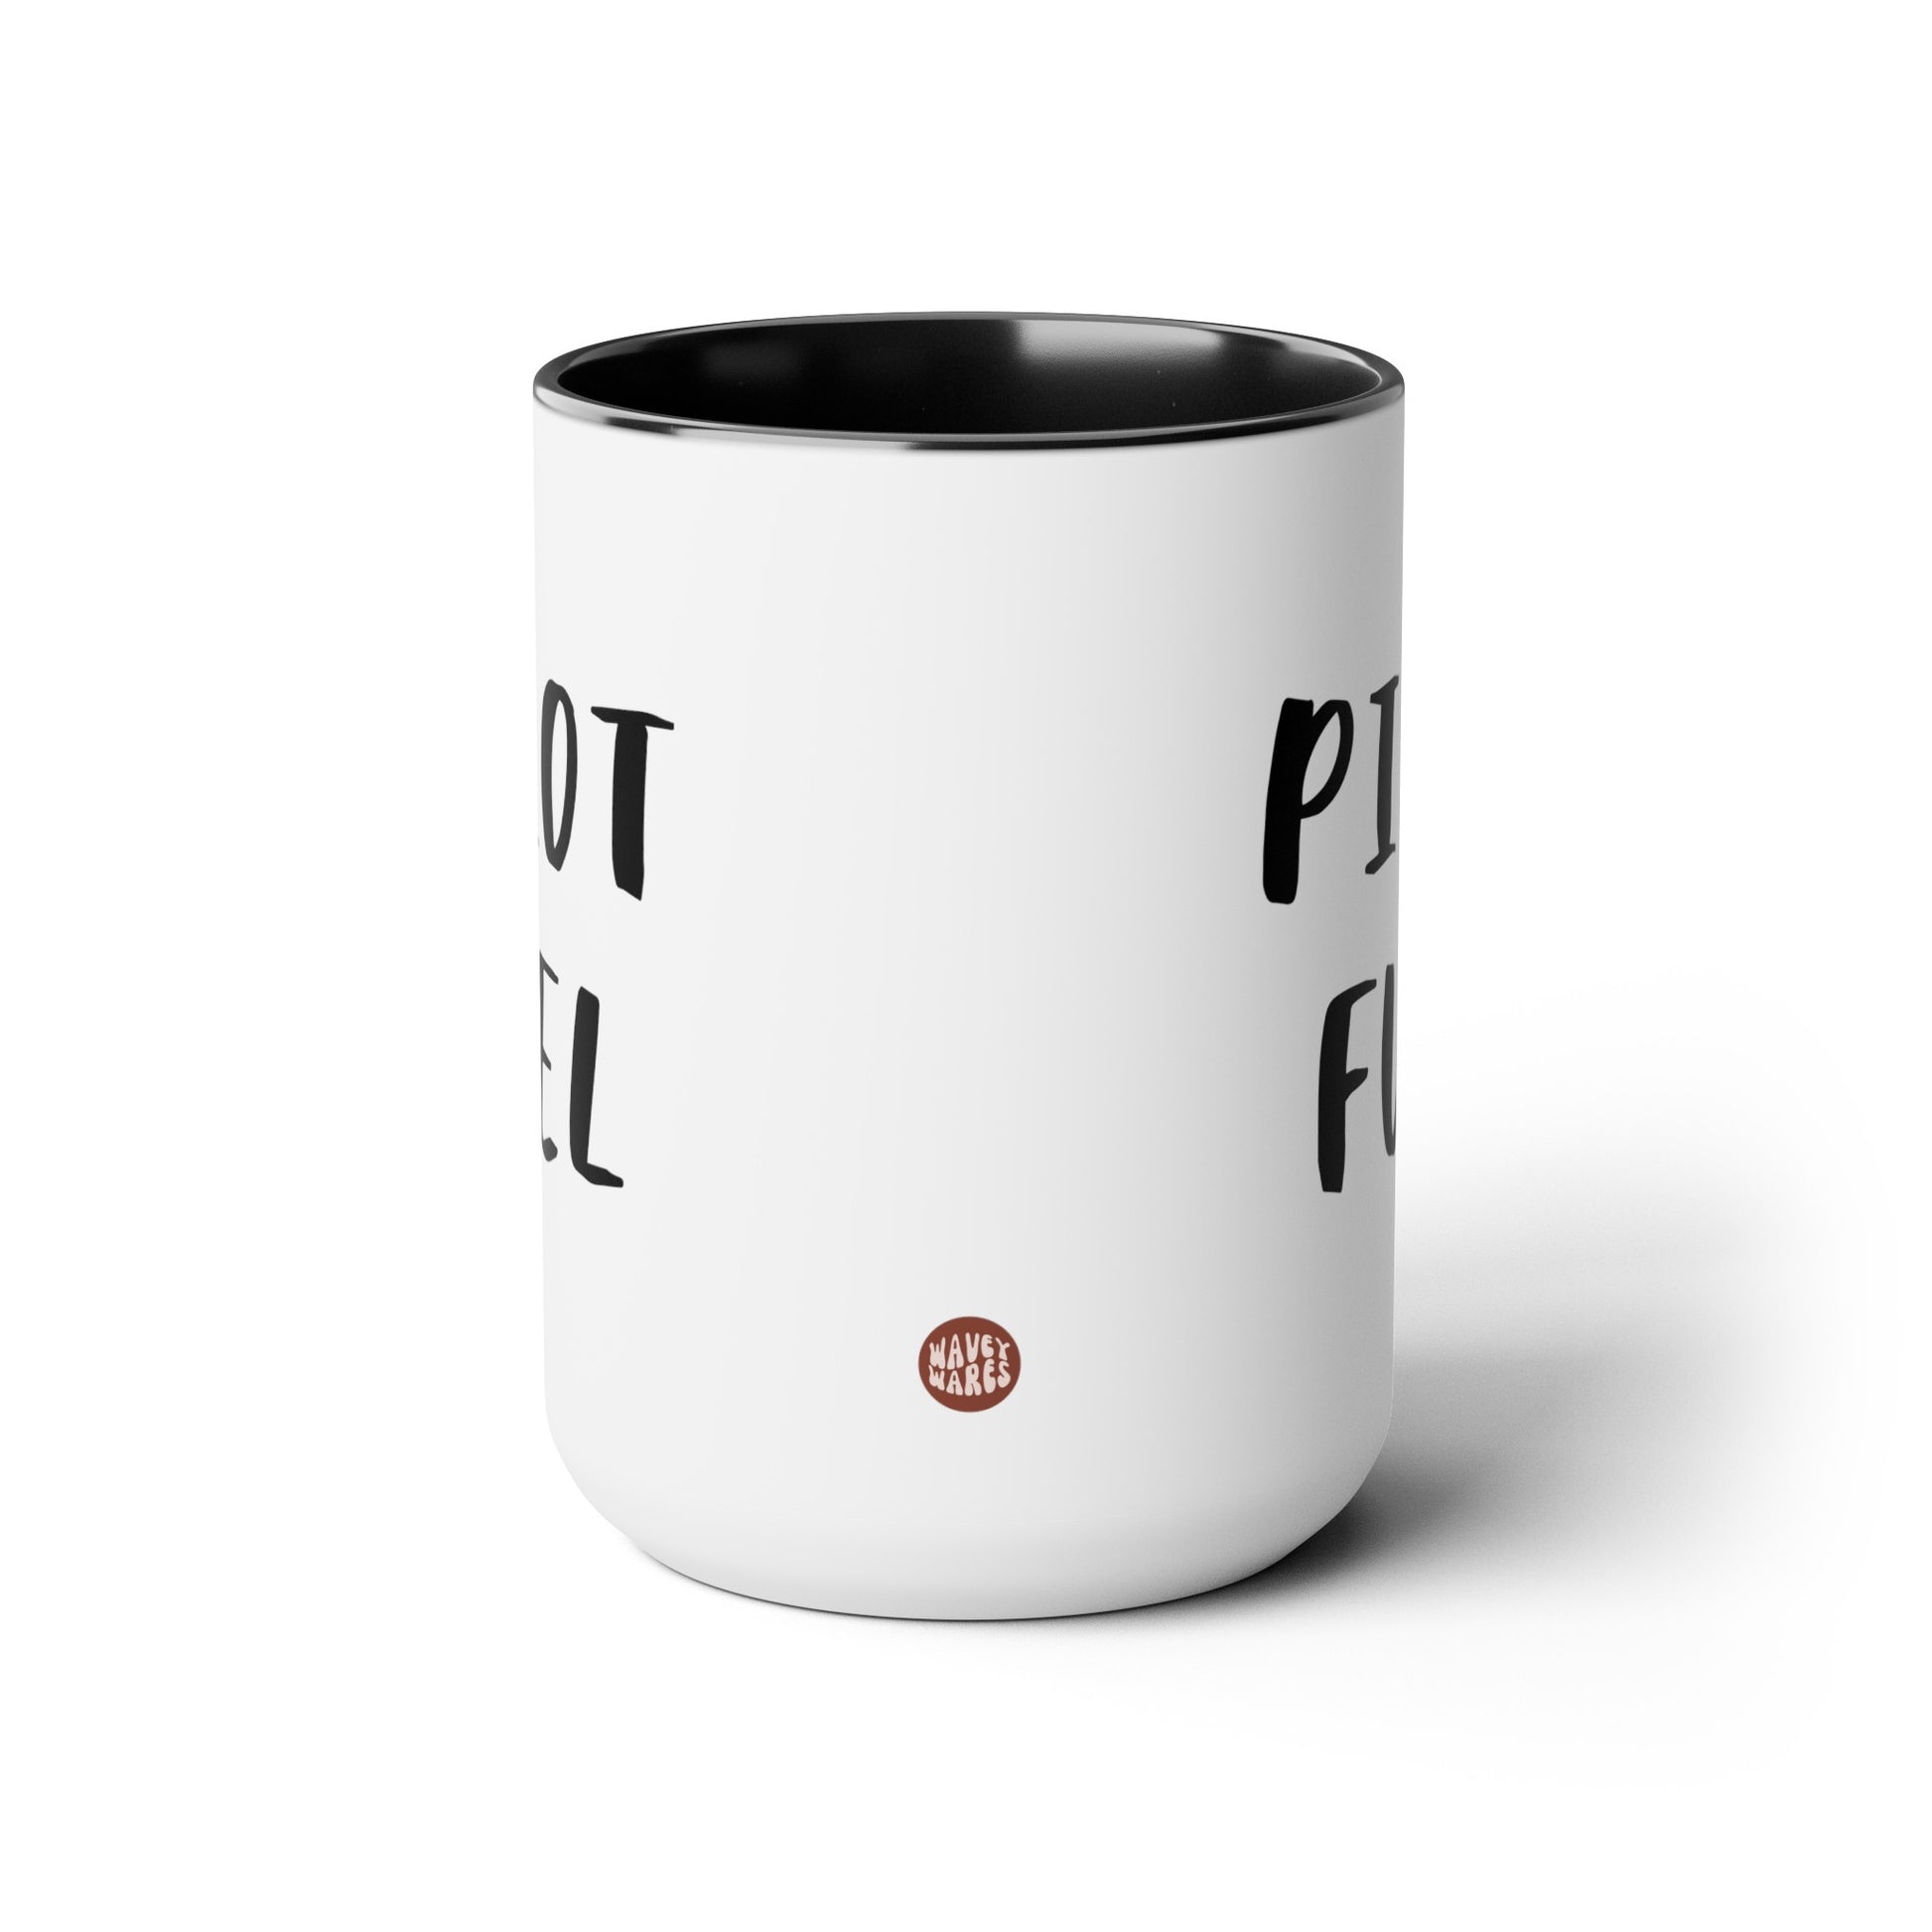 Pilot Fuel 15oz white with black accent funny large coffee mug gift for world's best pilot present waveywares wavey wares wavywares wavy wares side